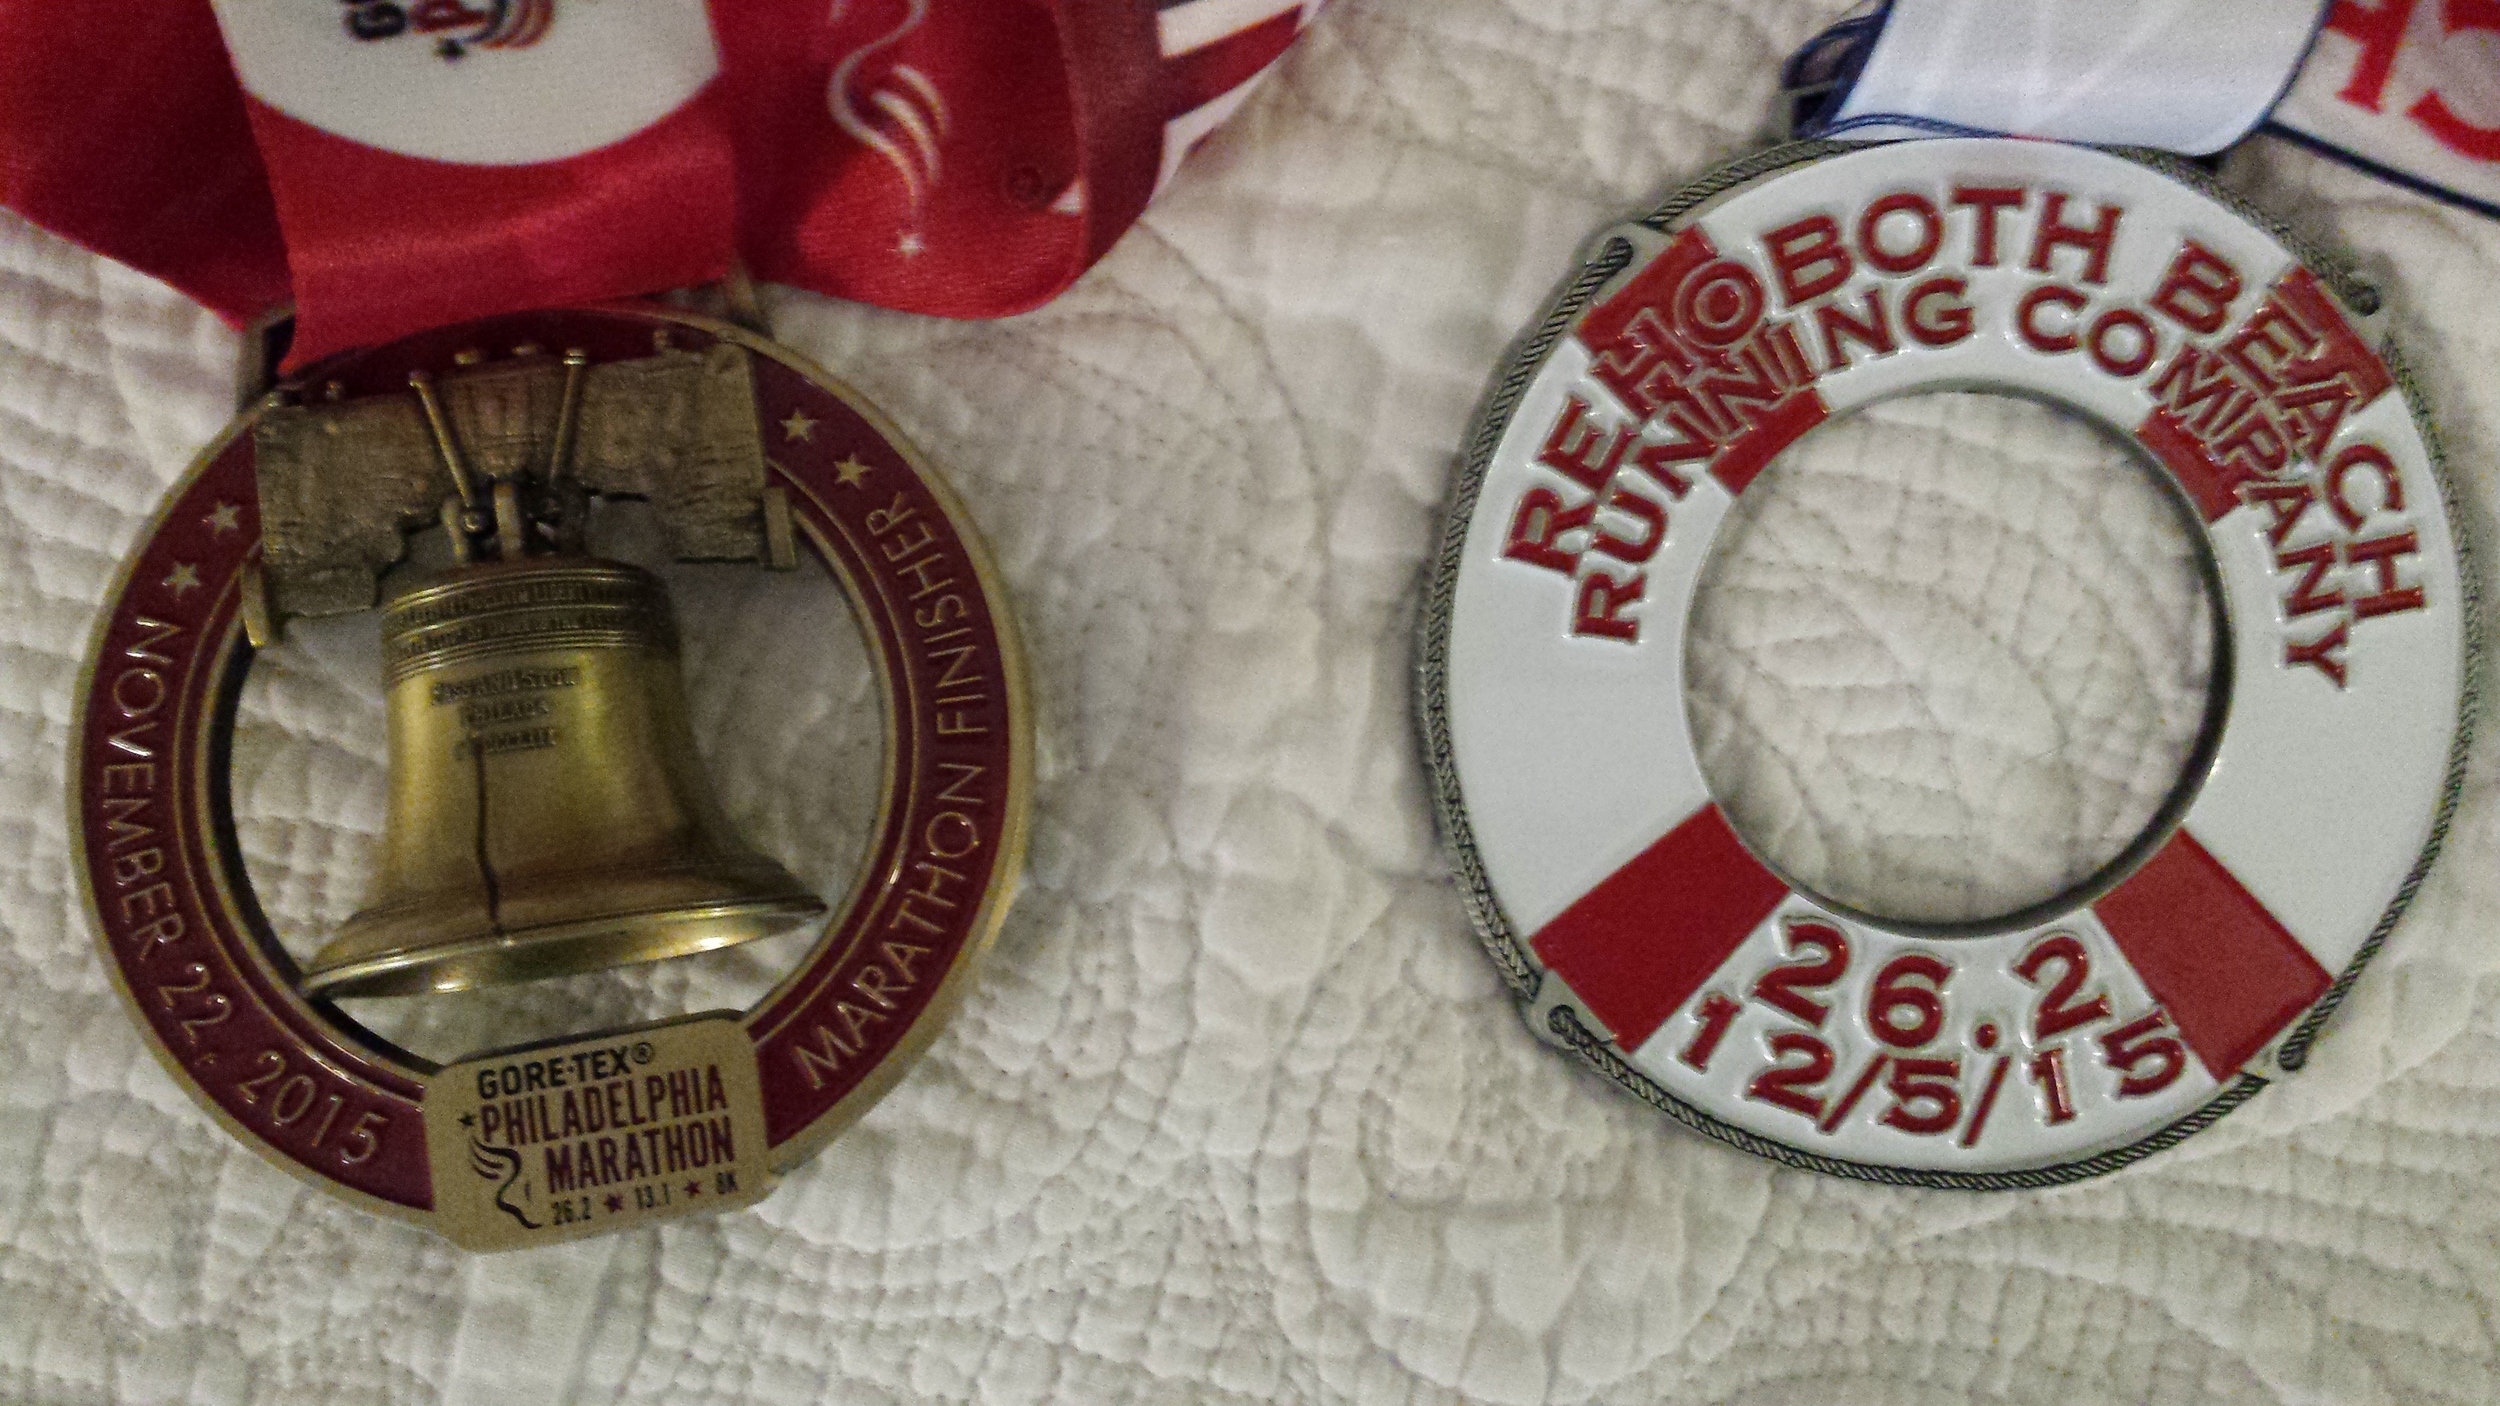 Philadelphia and Rehoboth Medals